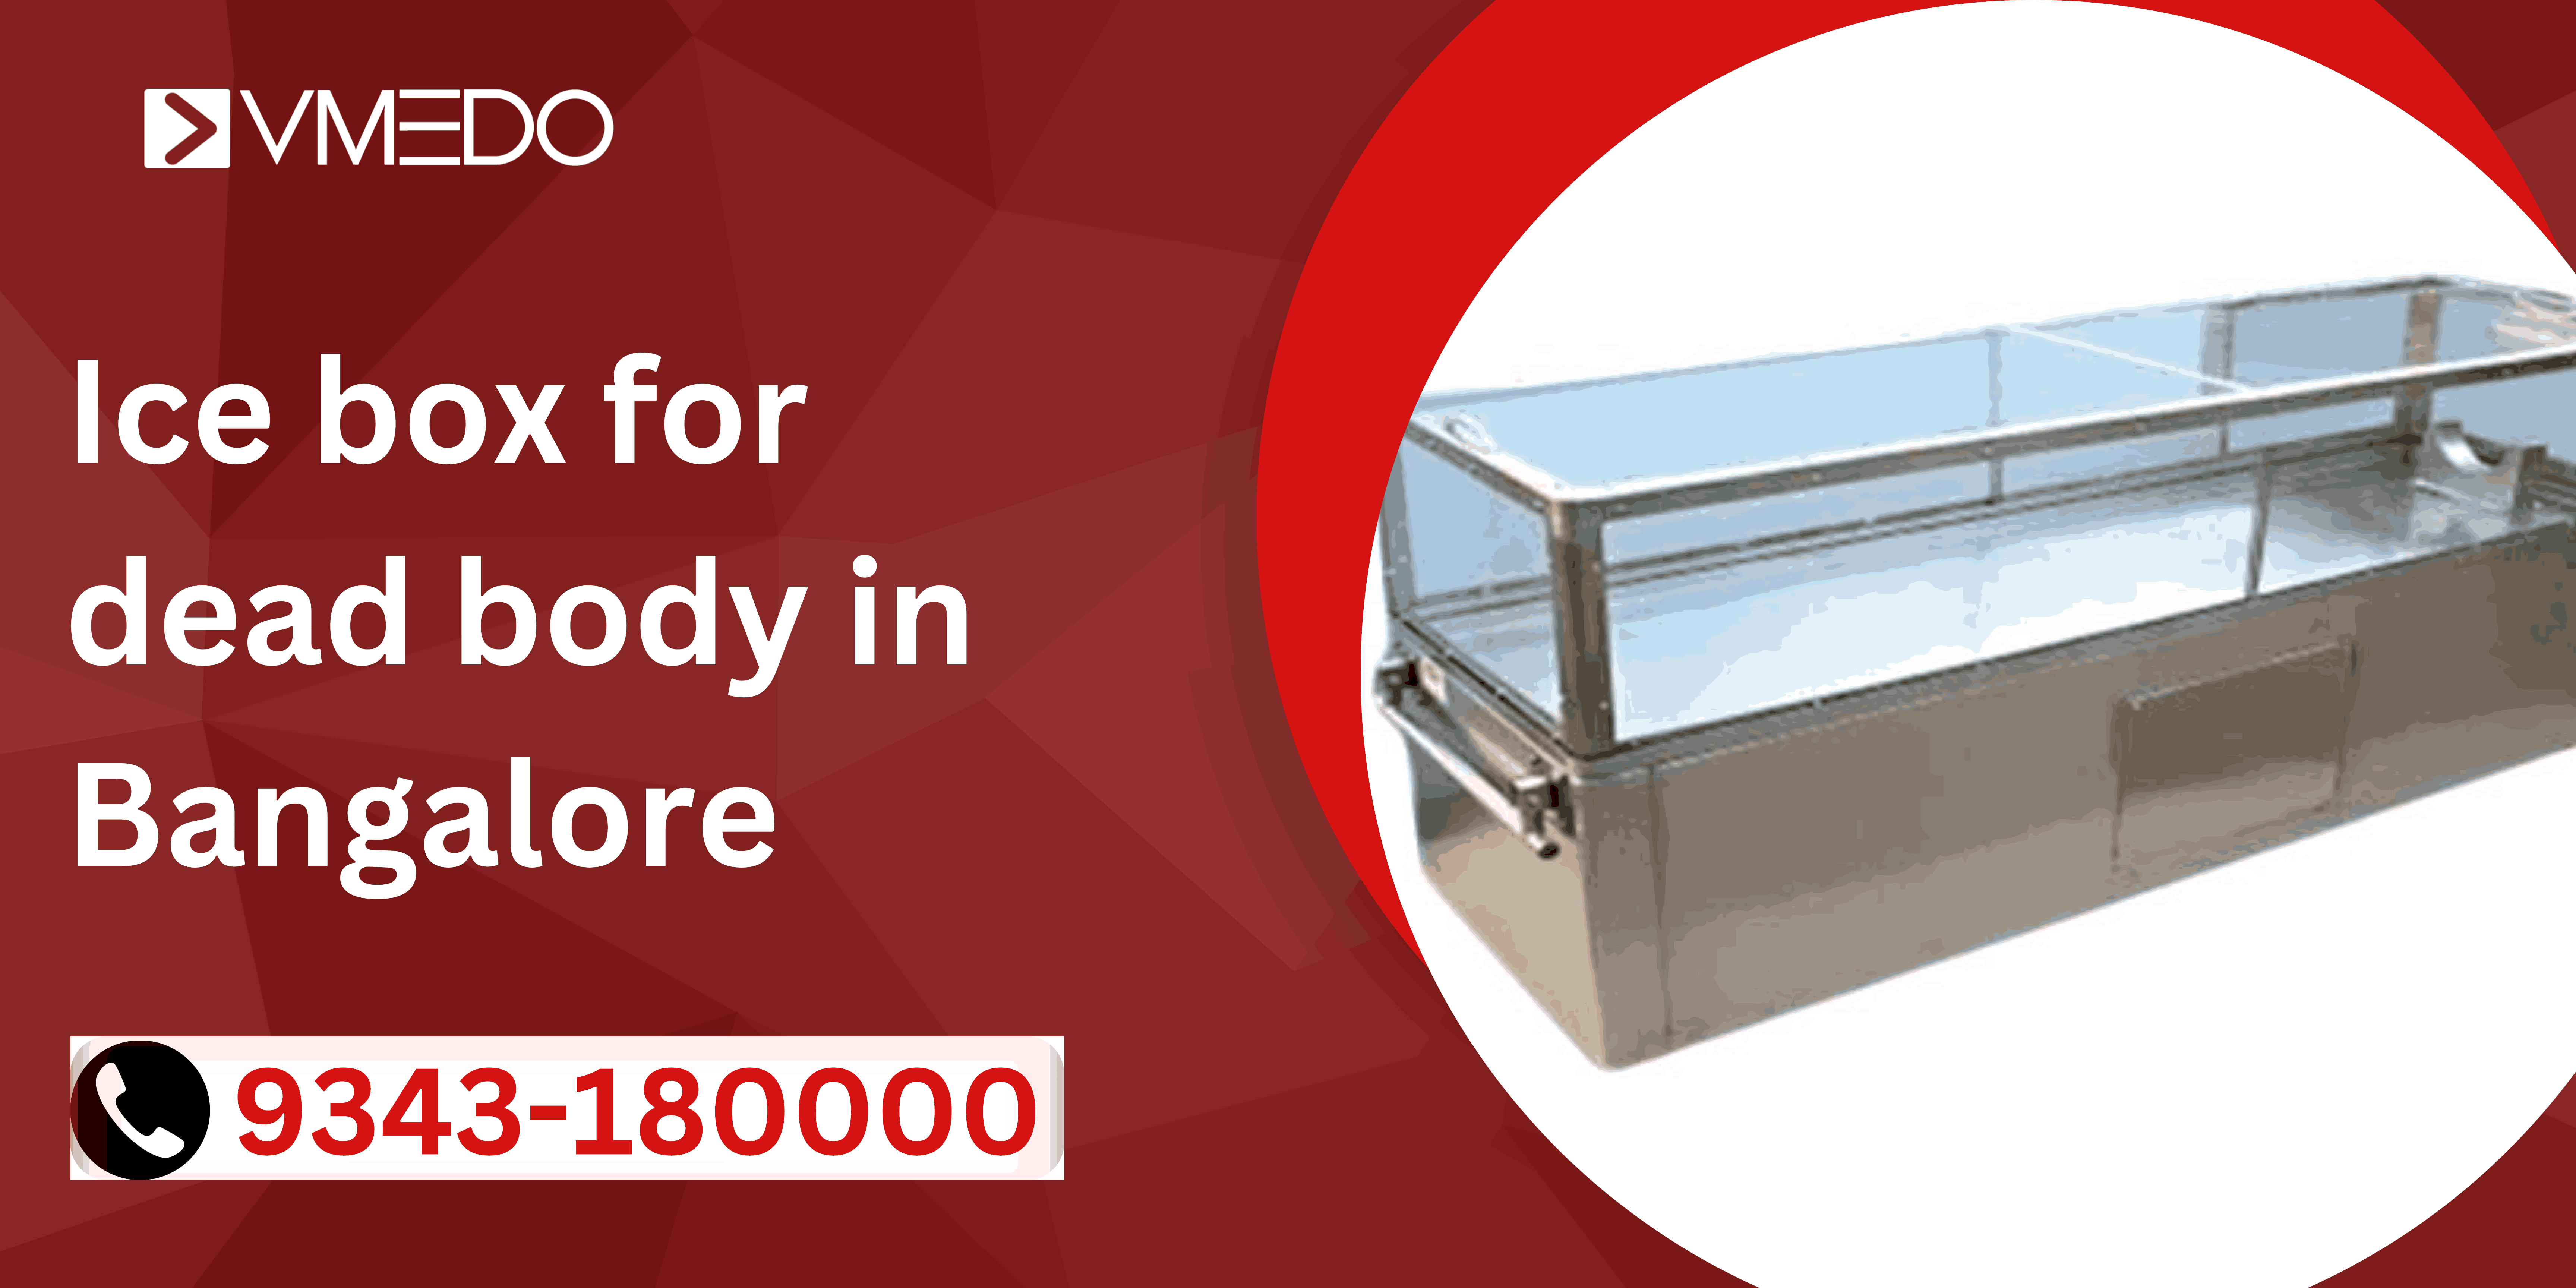 Ice box for dead body in Bangalore